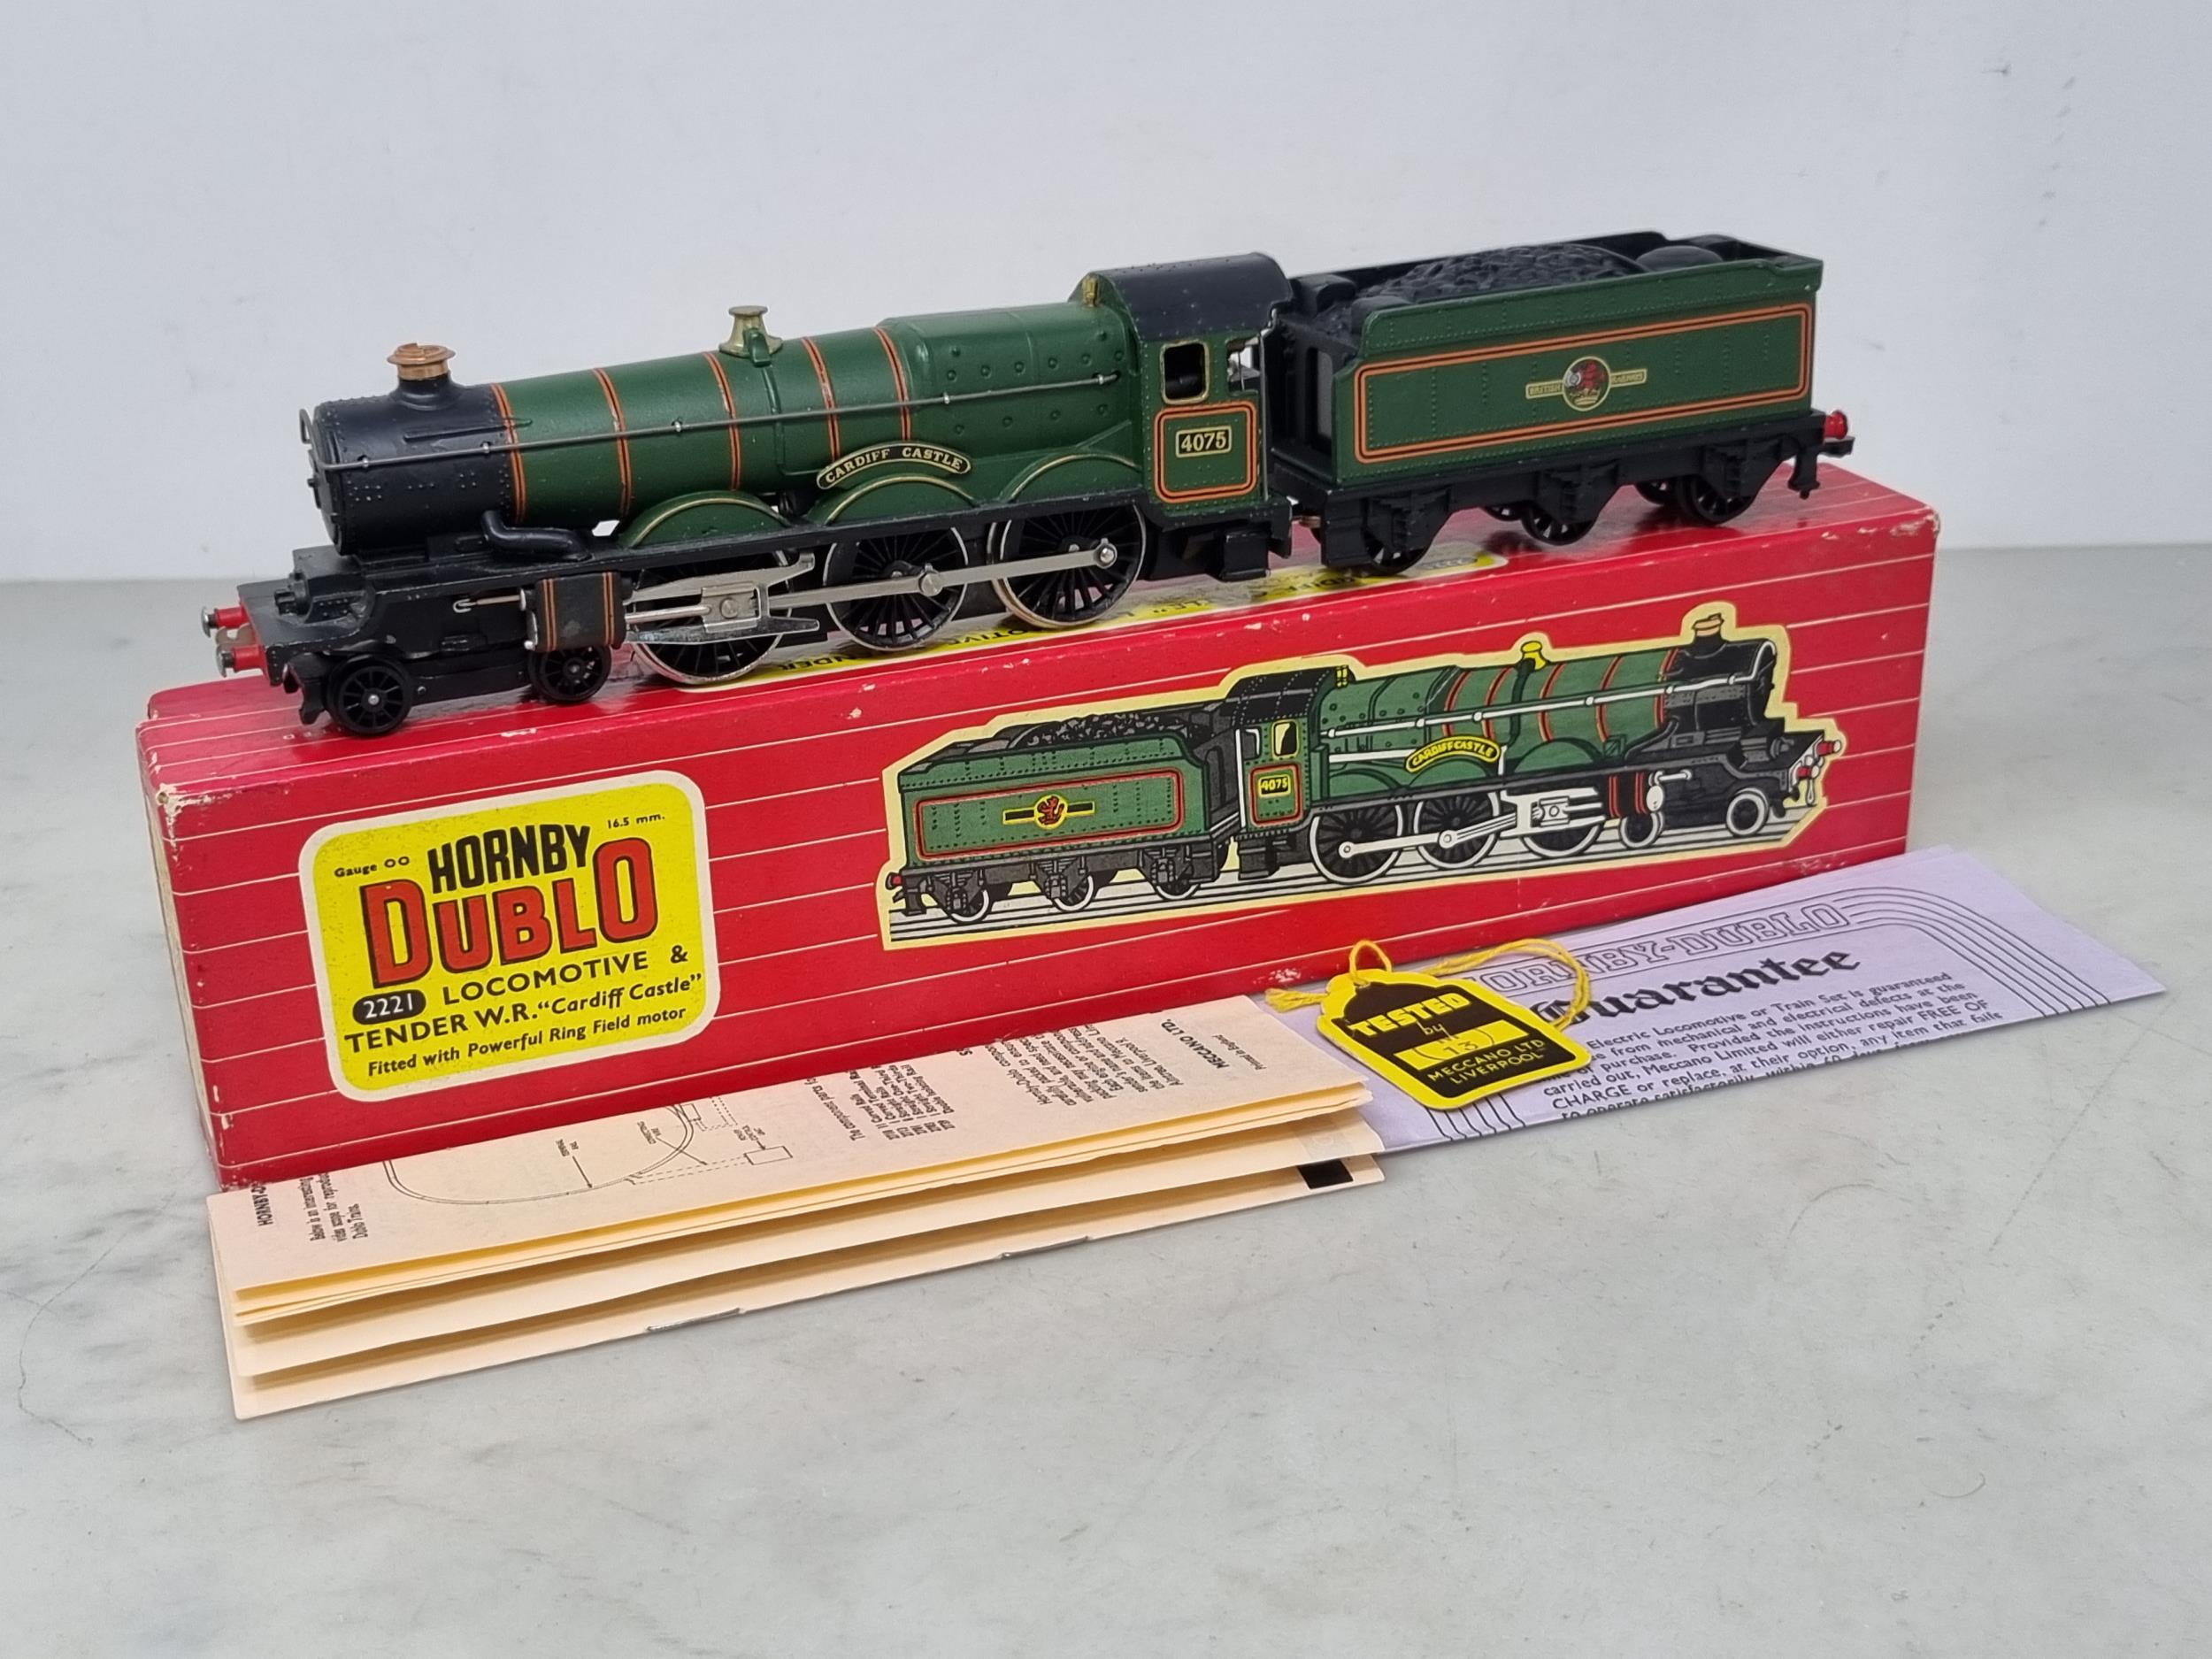 A boxed Hornby Dublo 2221 'Cardiff Castle' Locomotive, unused. Locomotive in mint condition with